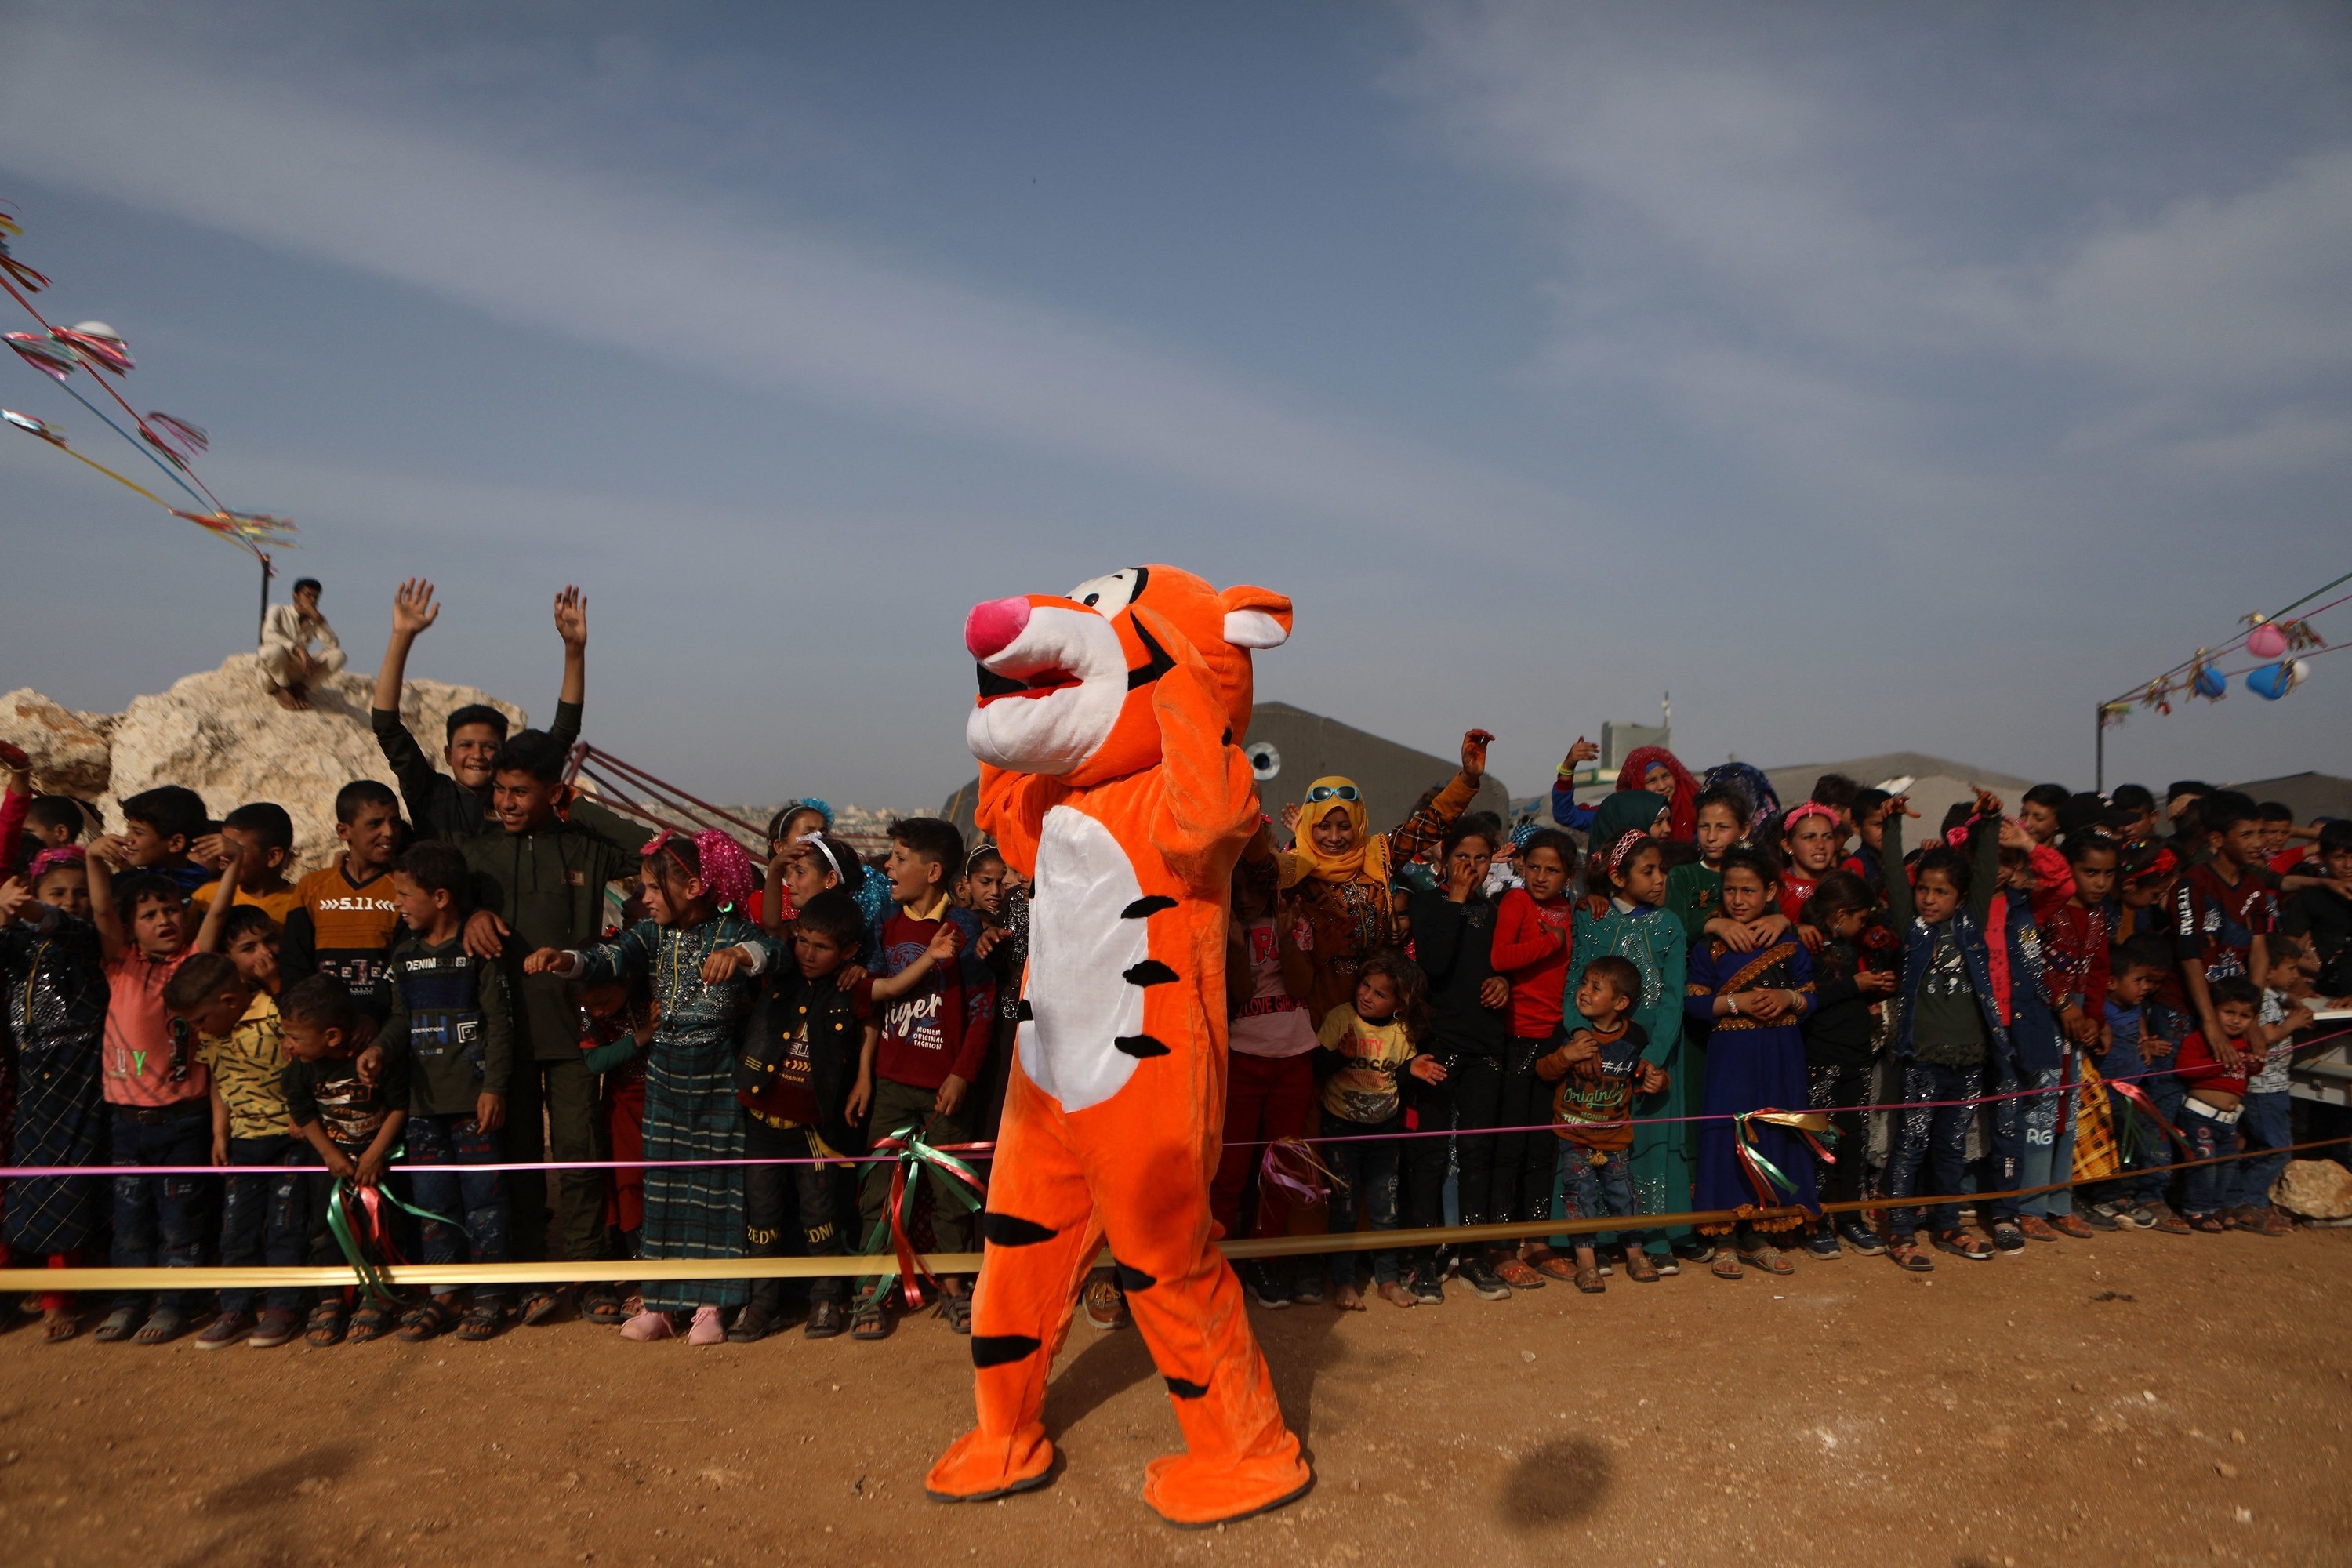 A person dressed as Tigger stands in front of a crowd